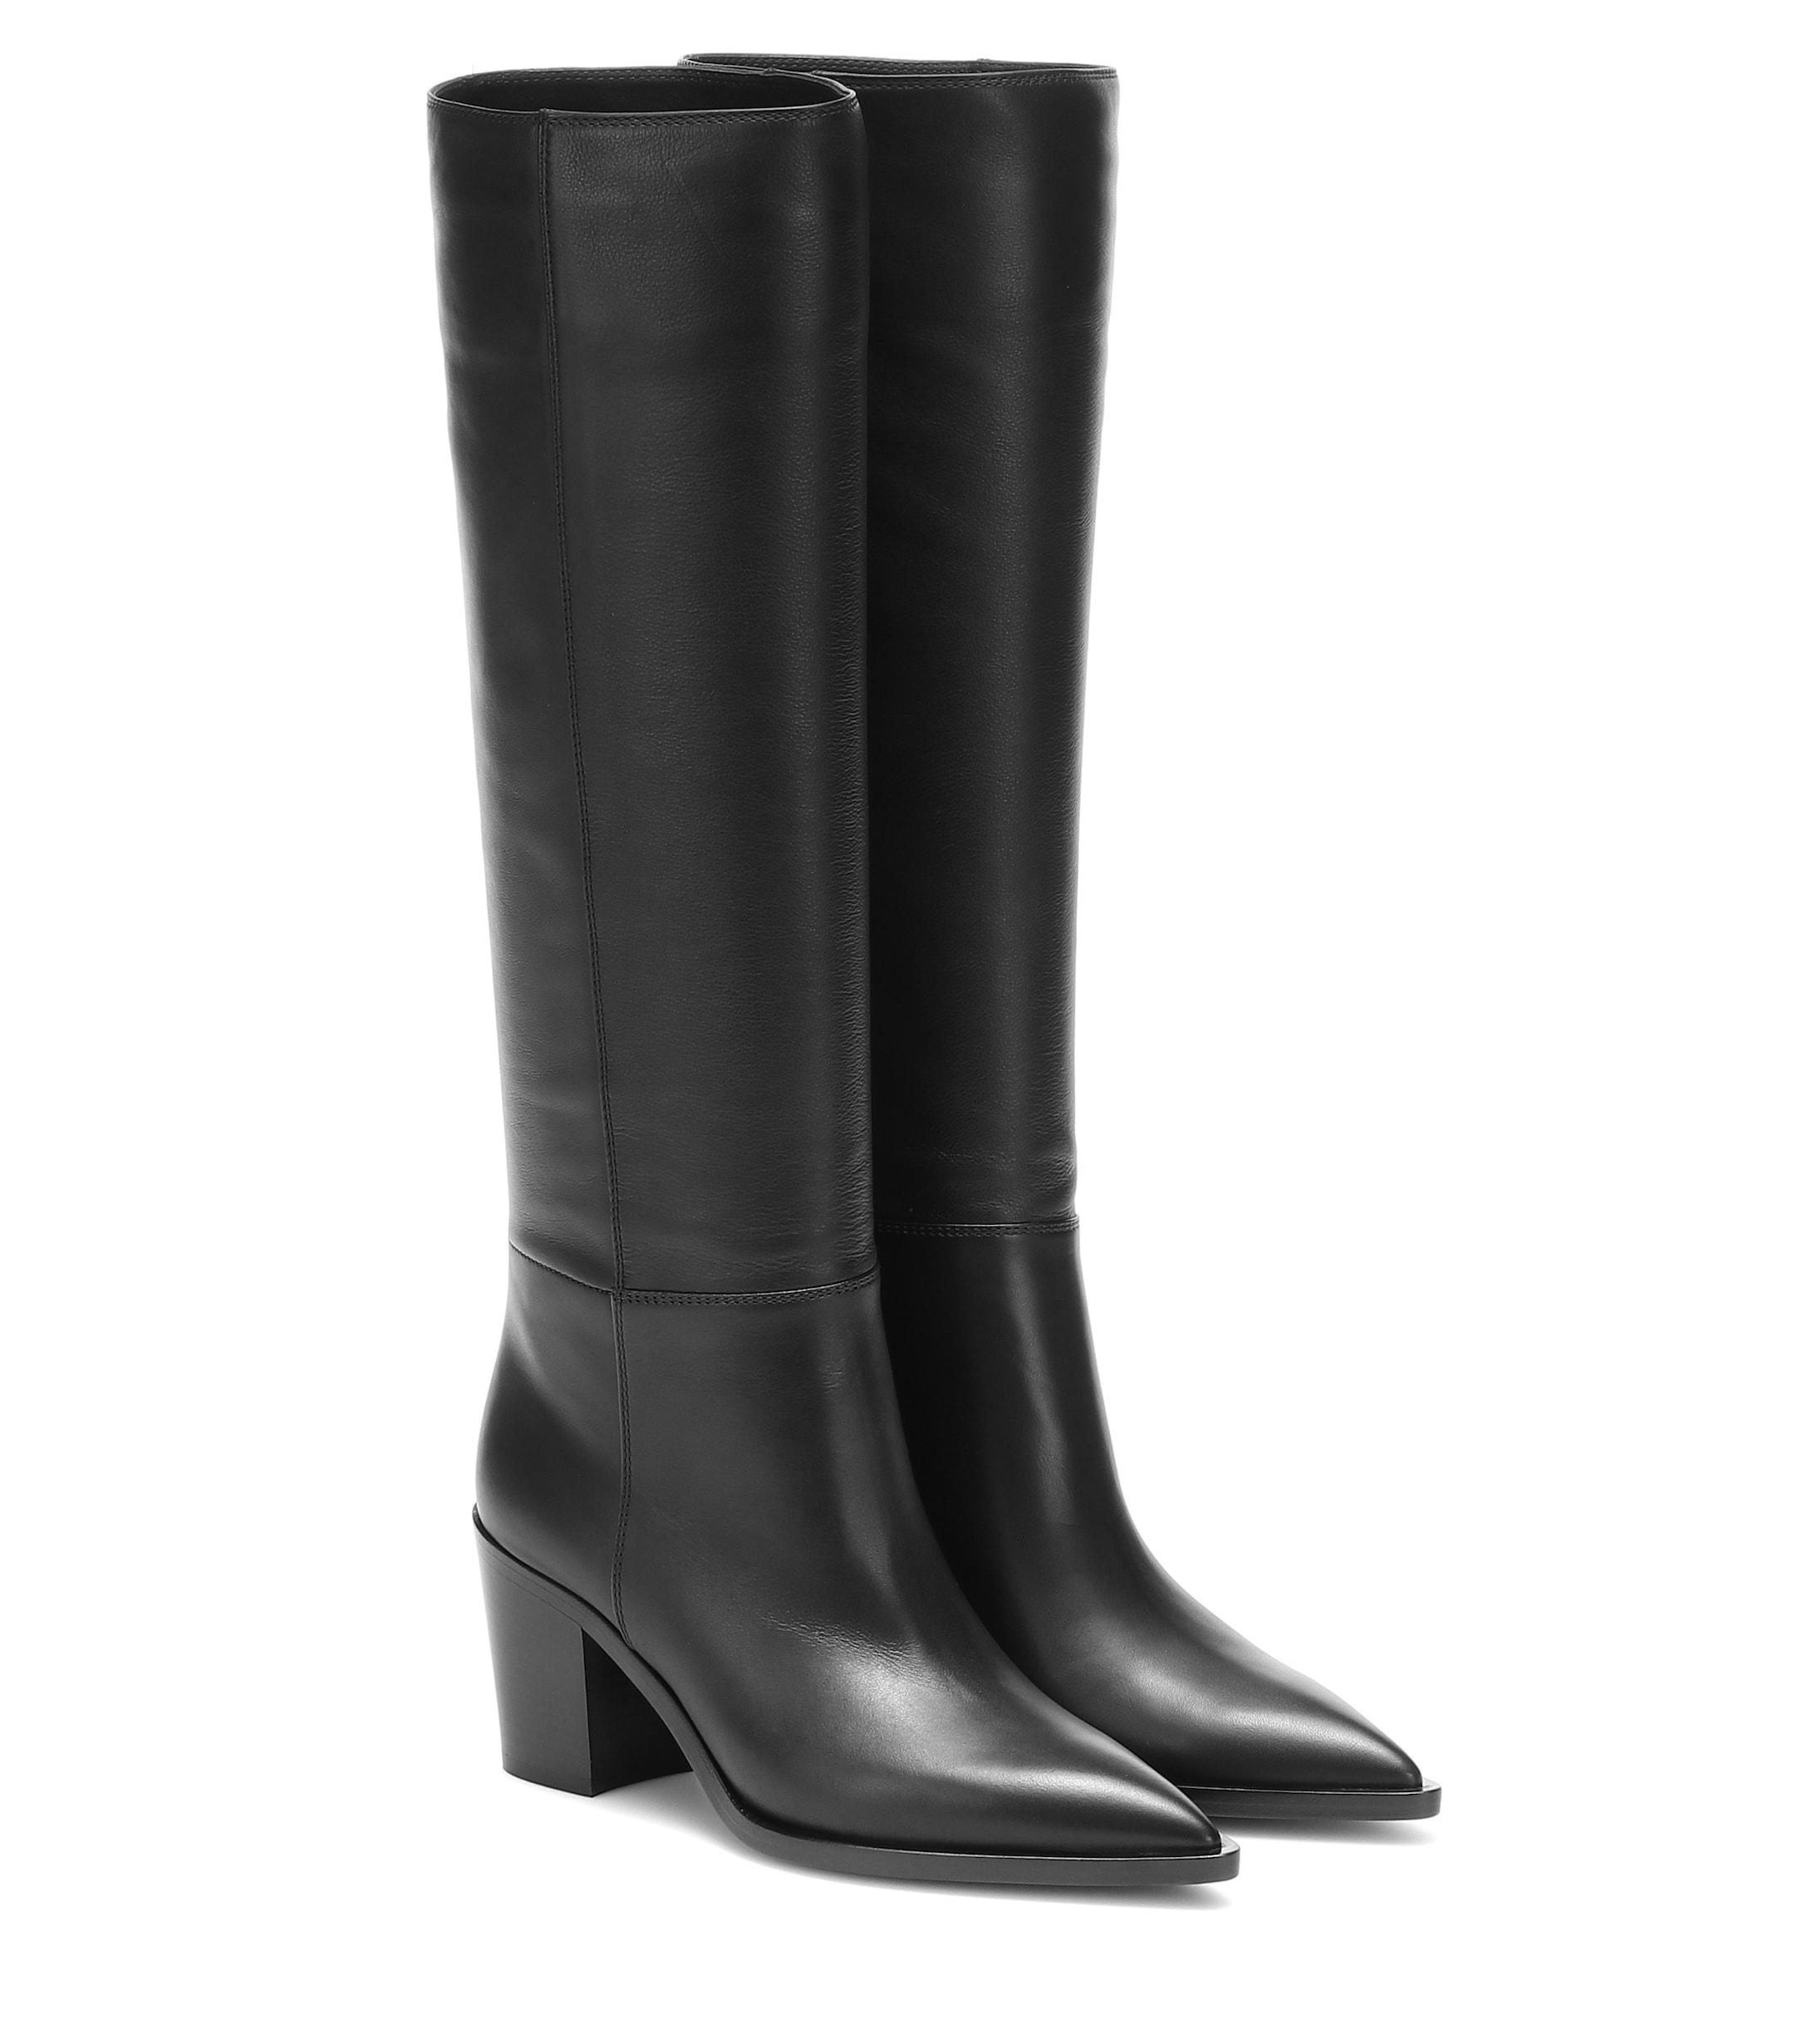 Gianvito Rossi Suede Daenerys 70 Leather Knee-high Boots in Black - Lyst